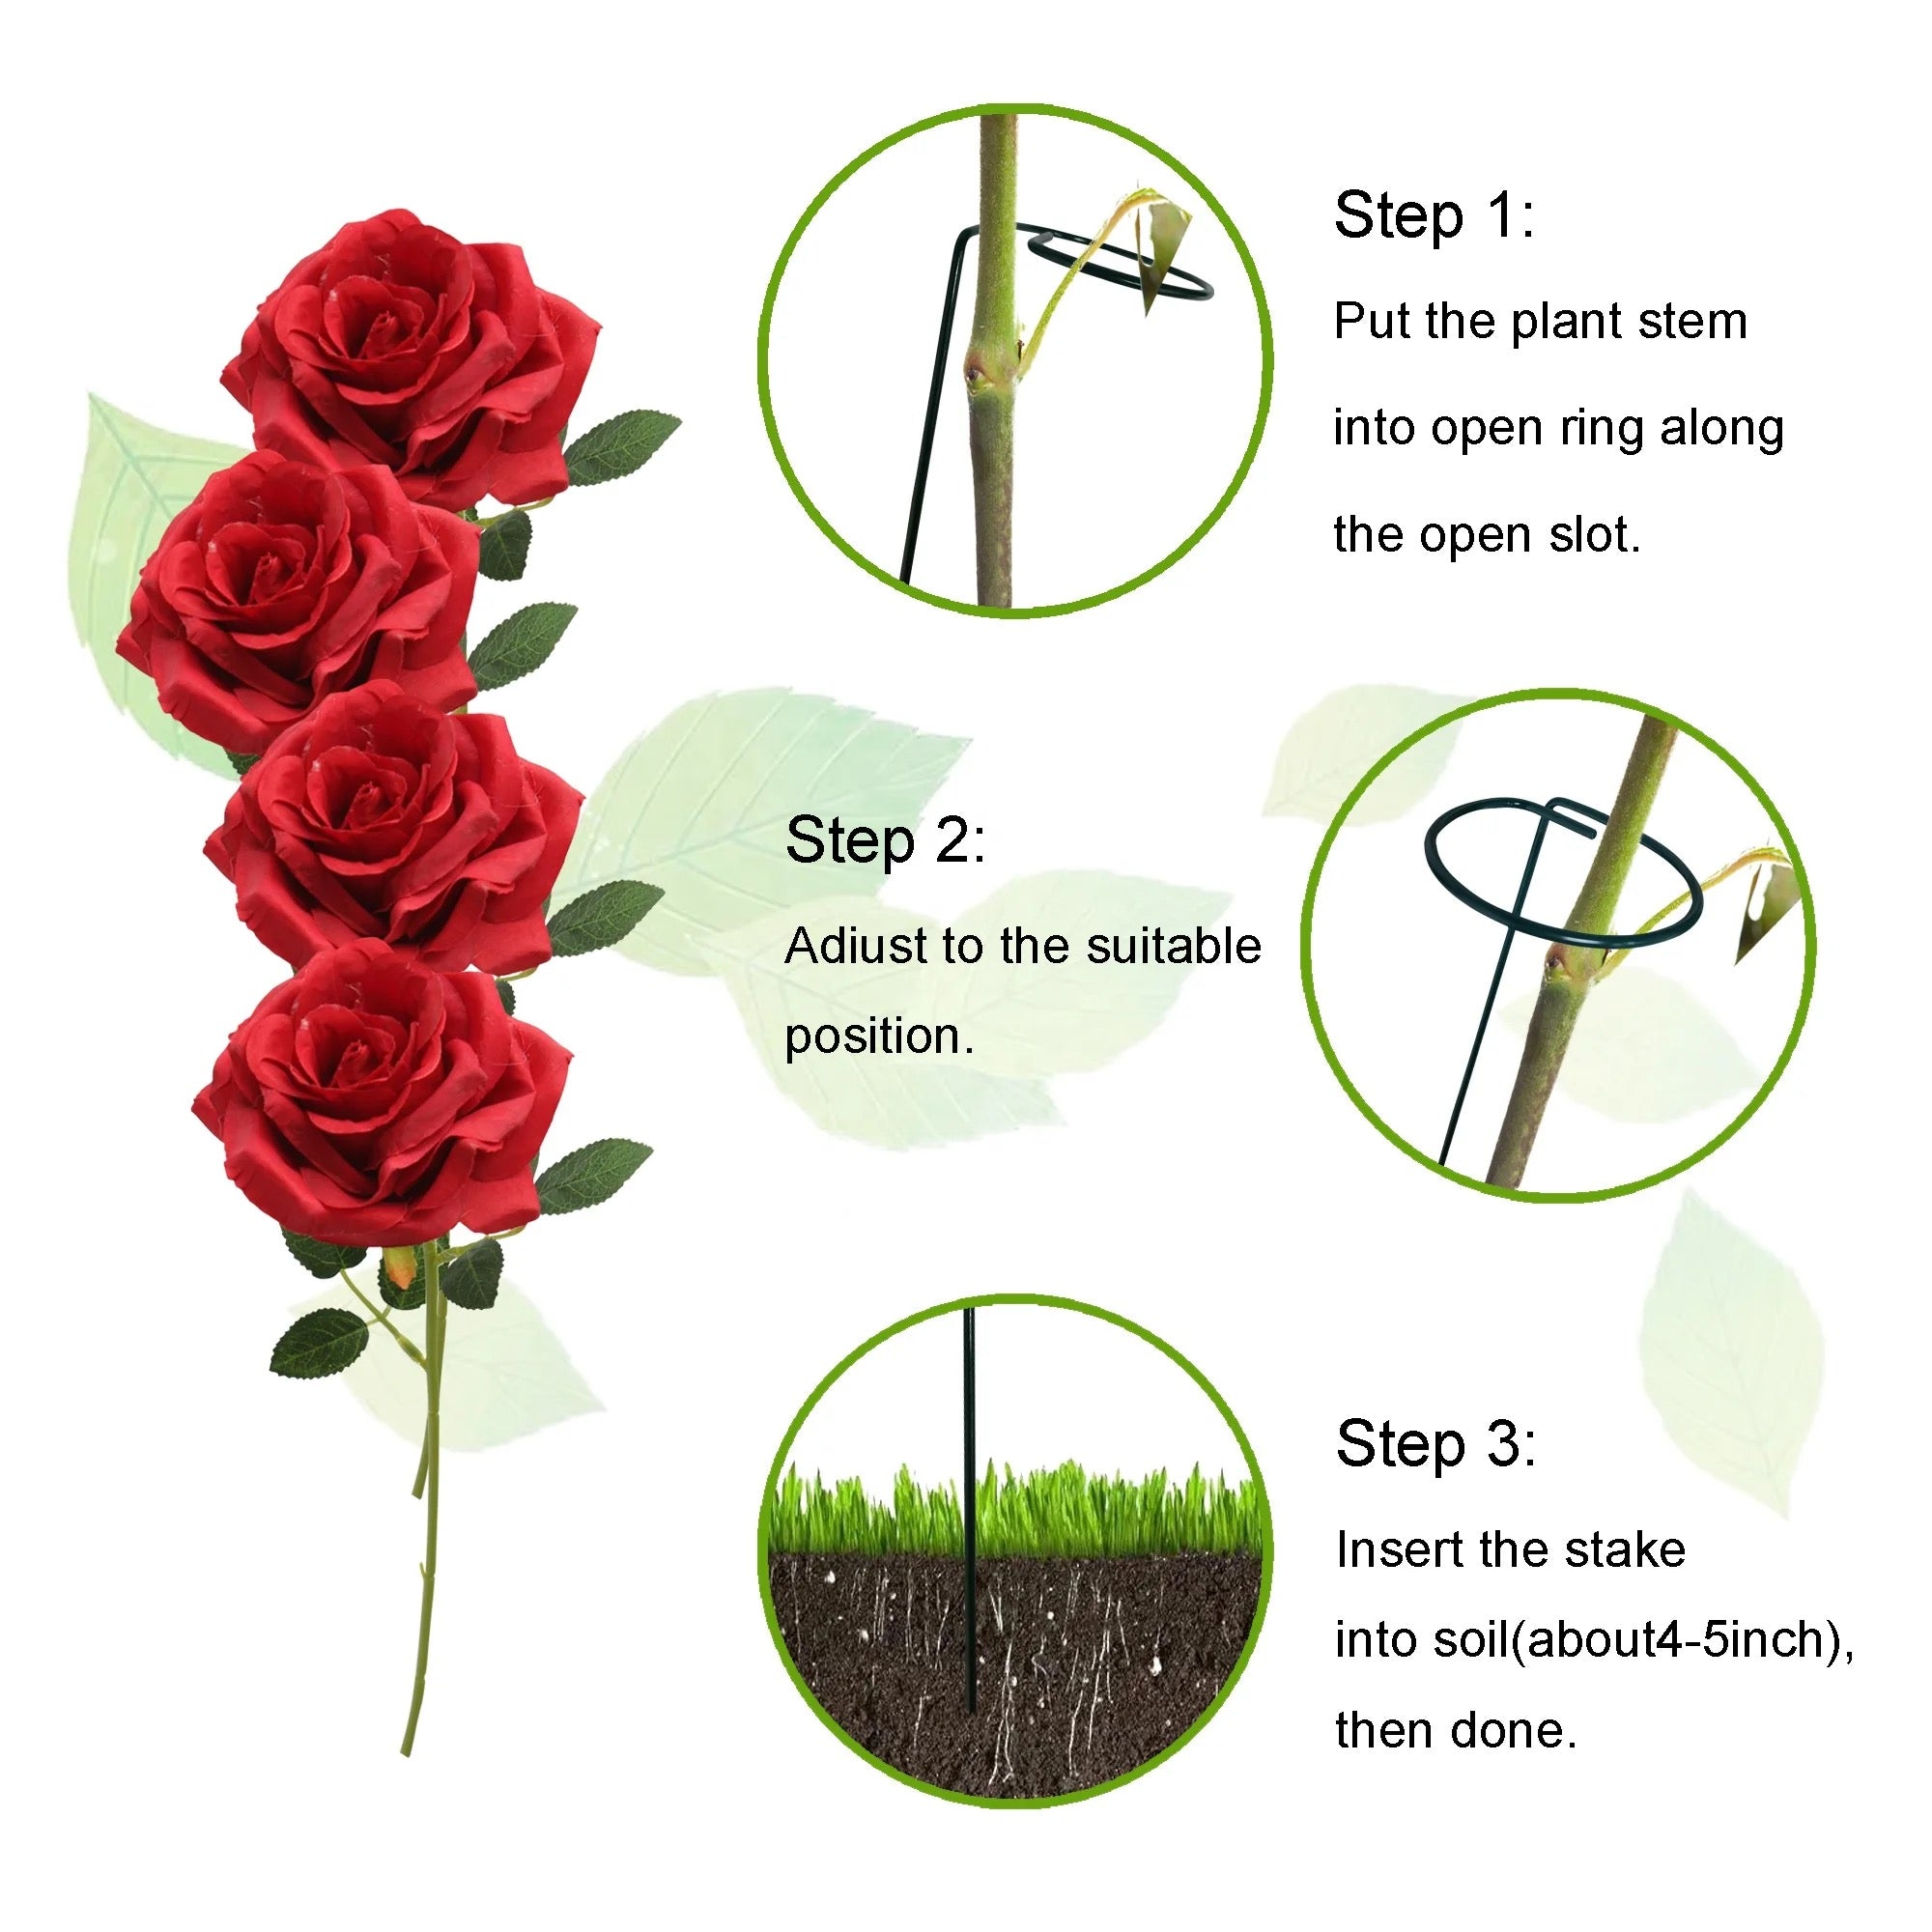 steps for installing Metal Garden Plant Support Stakes